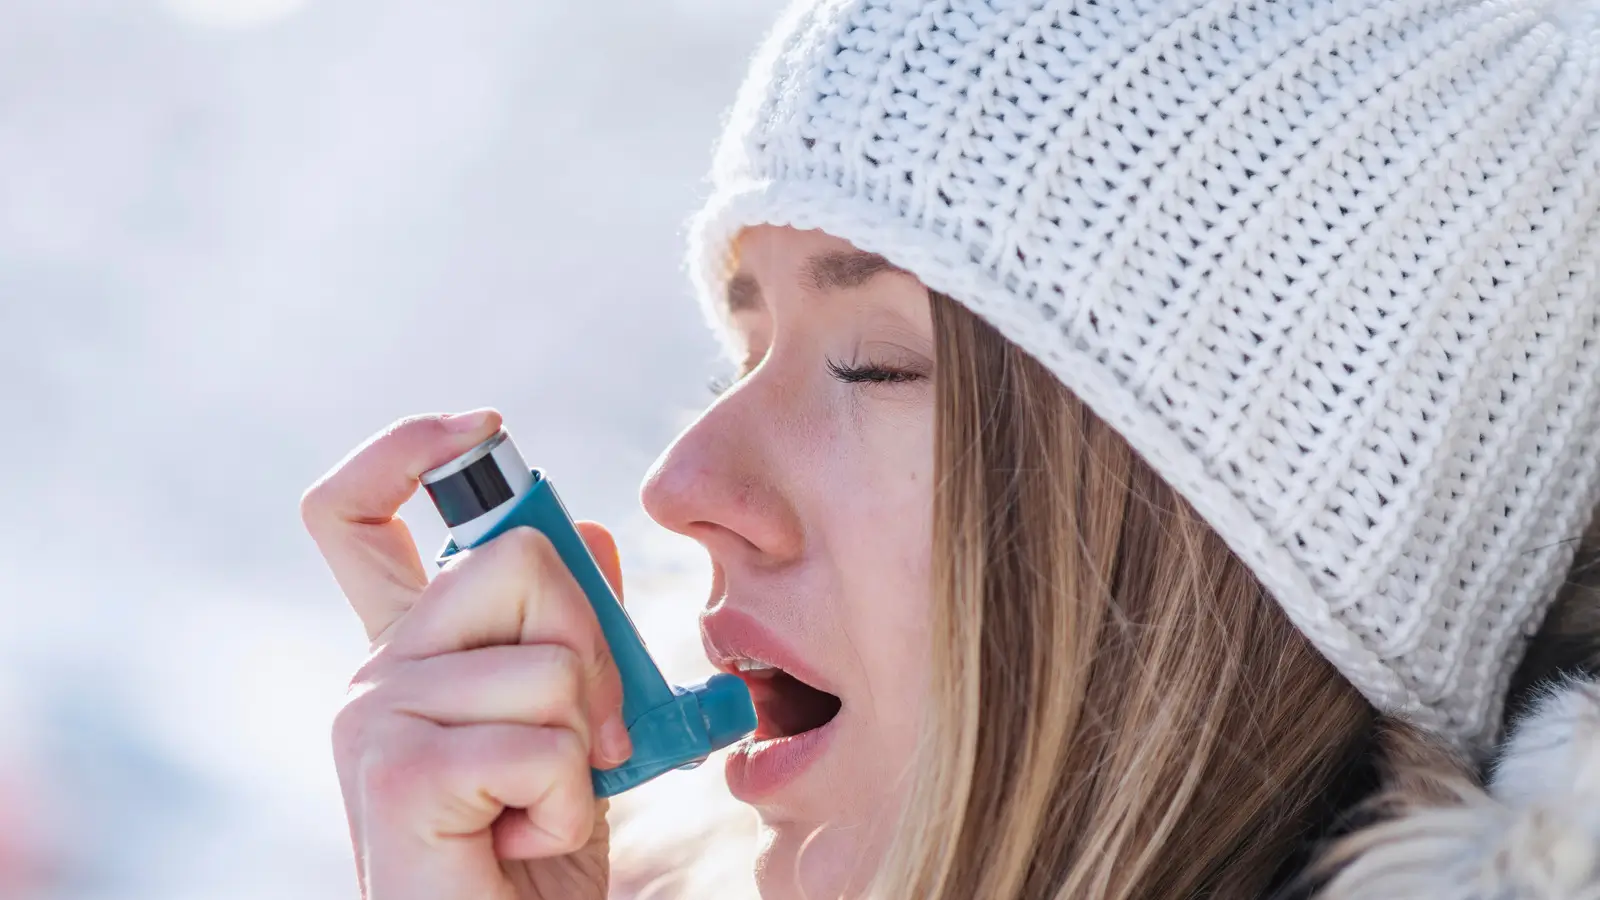 Managing Asthma During Winter Weather: Tips to Breathe Easier